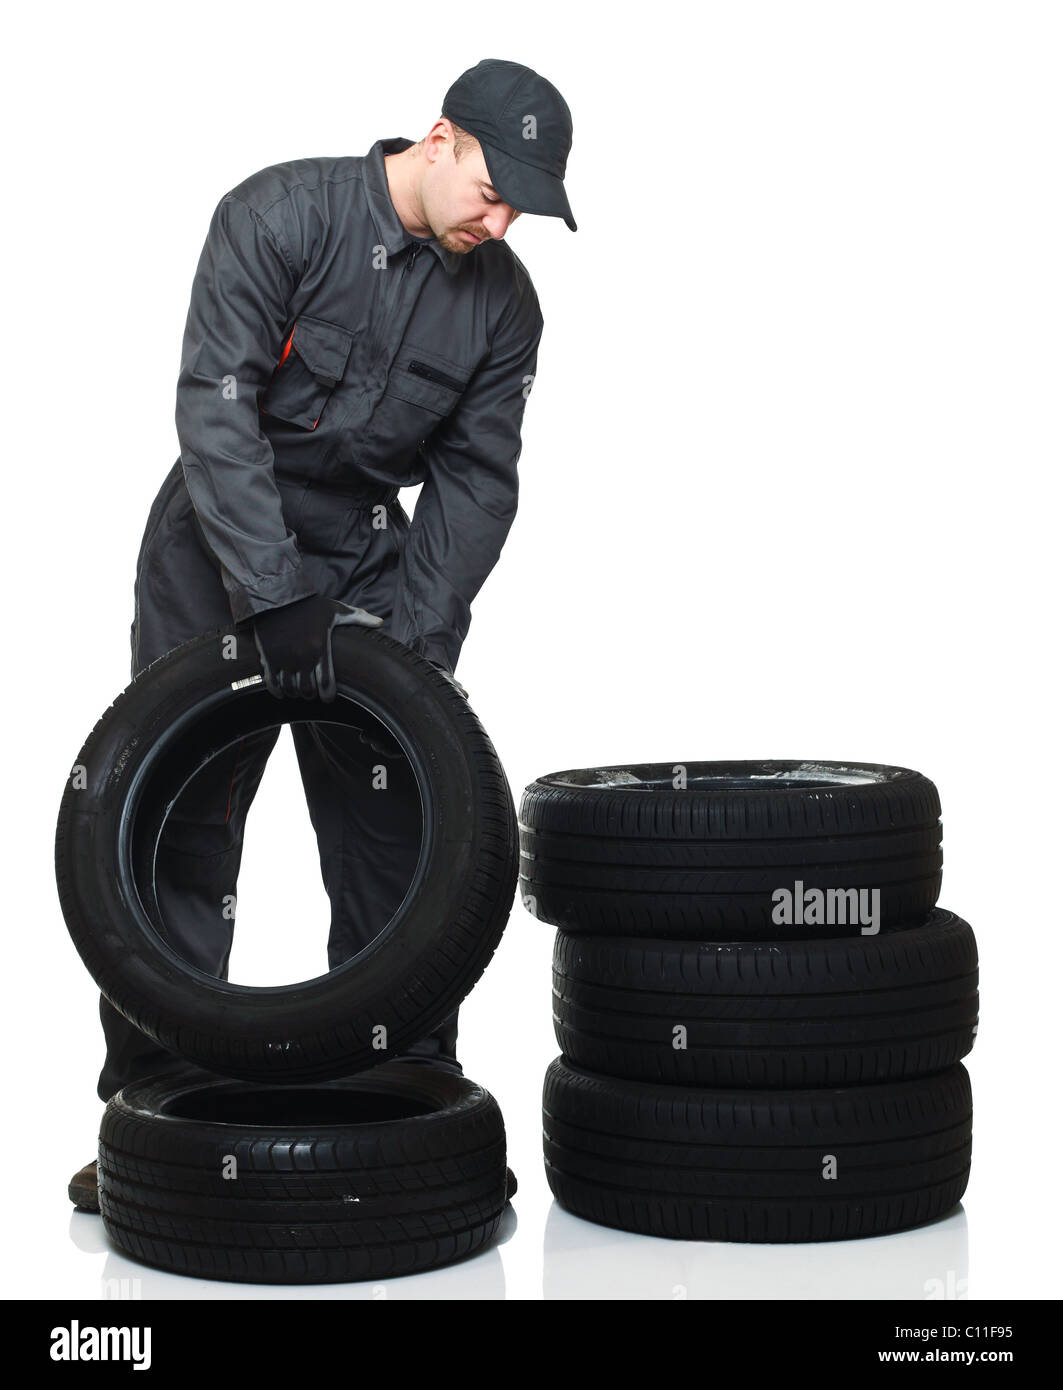 caucasian tire repairer on duty isolated on white background Stock Photo